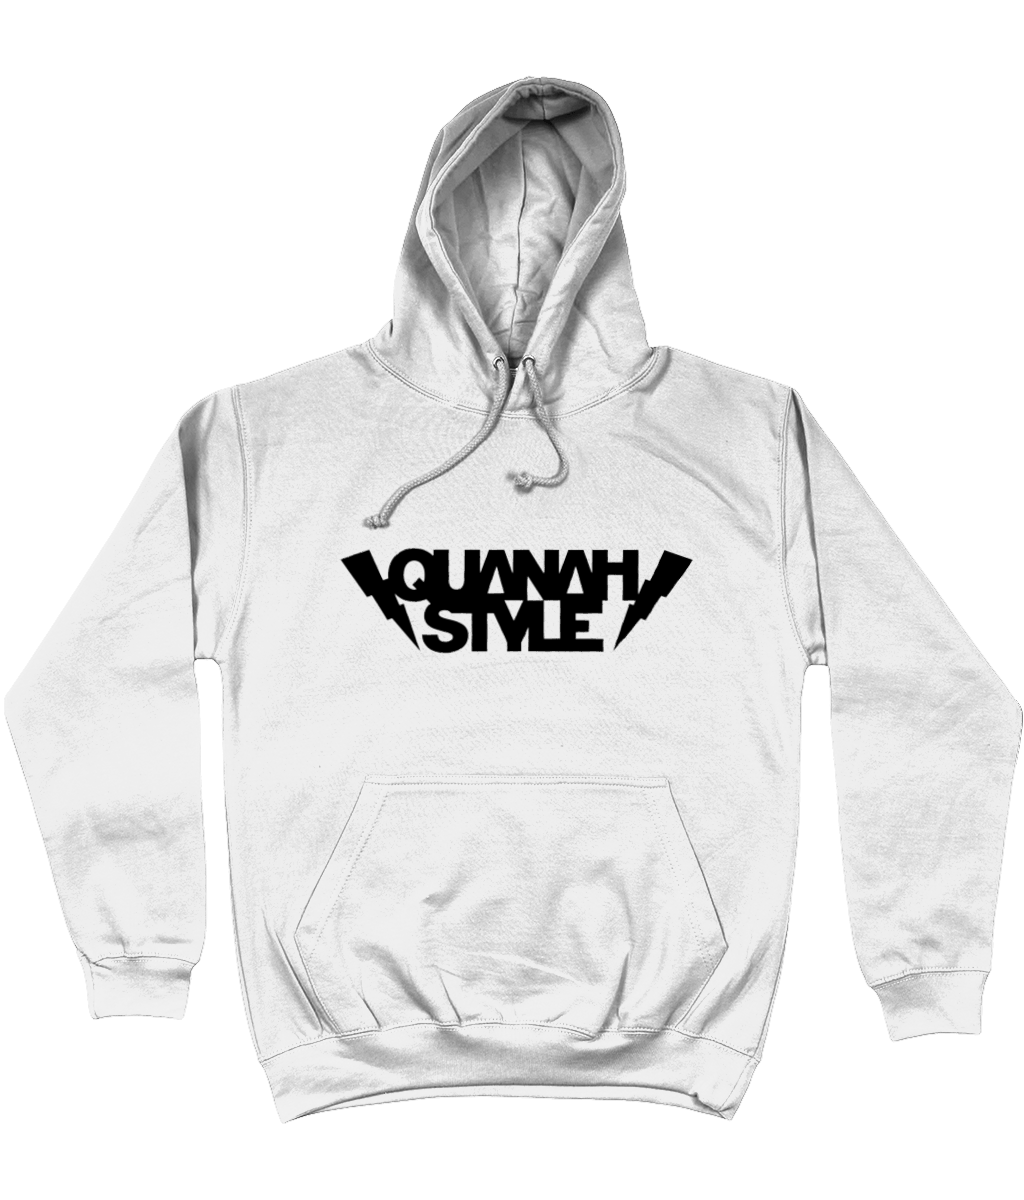 Quanah Style - Black Logo Hoodie - SNATCHED MERCH